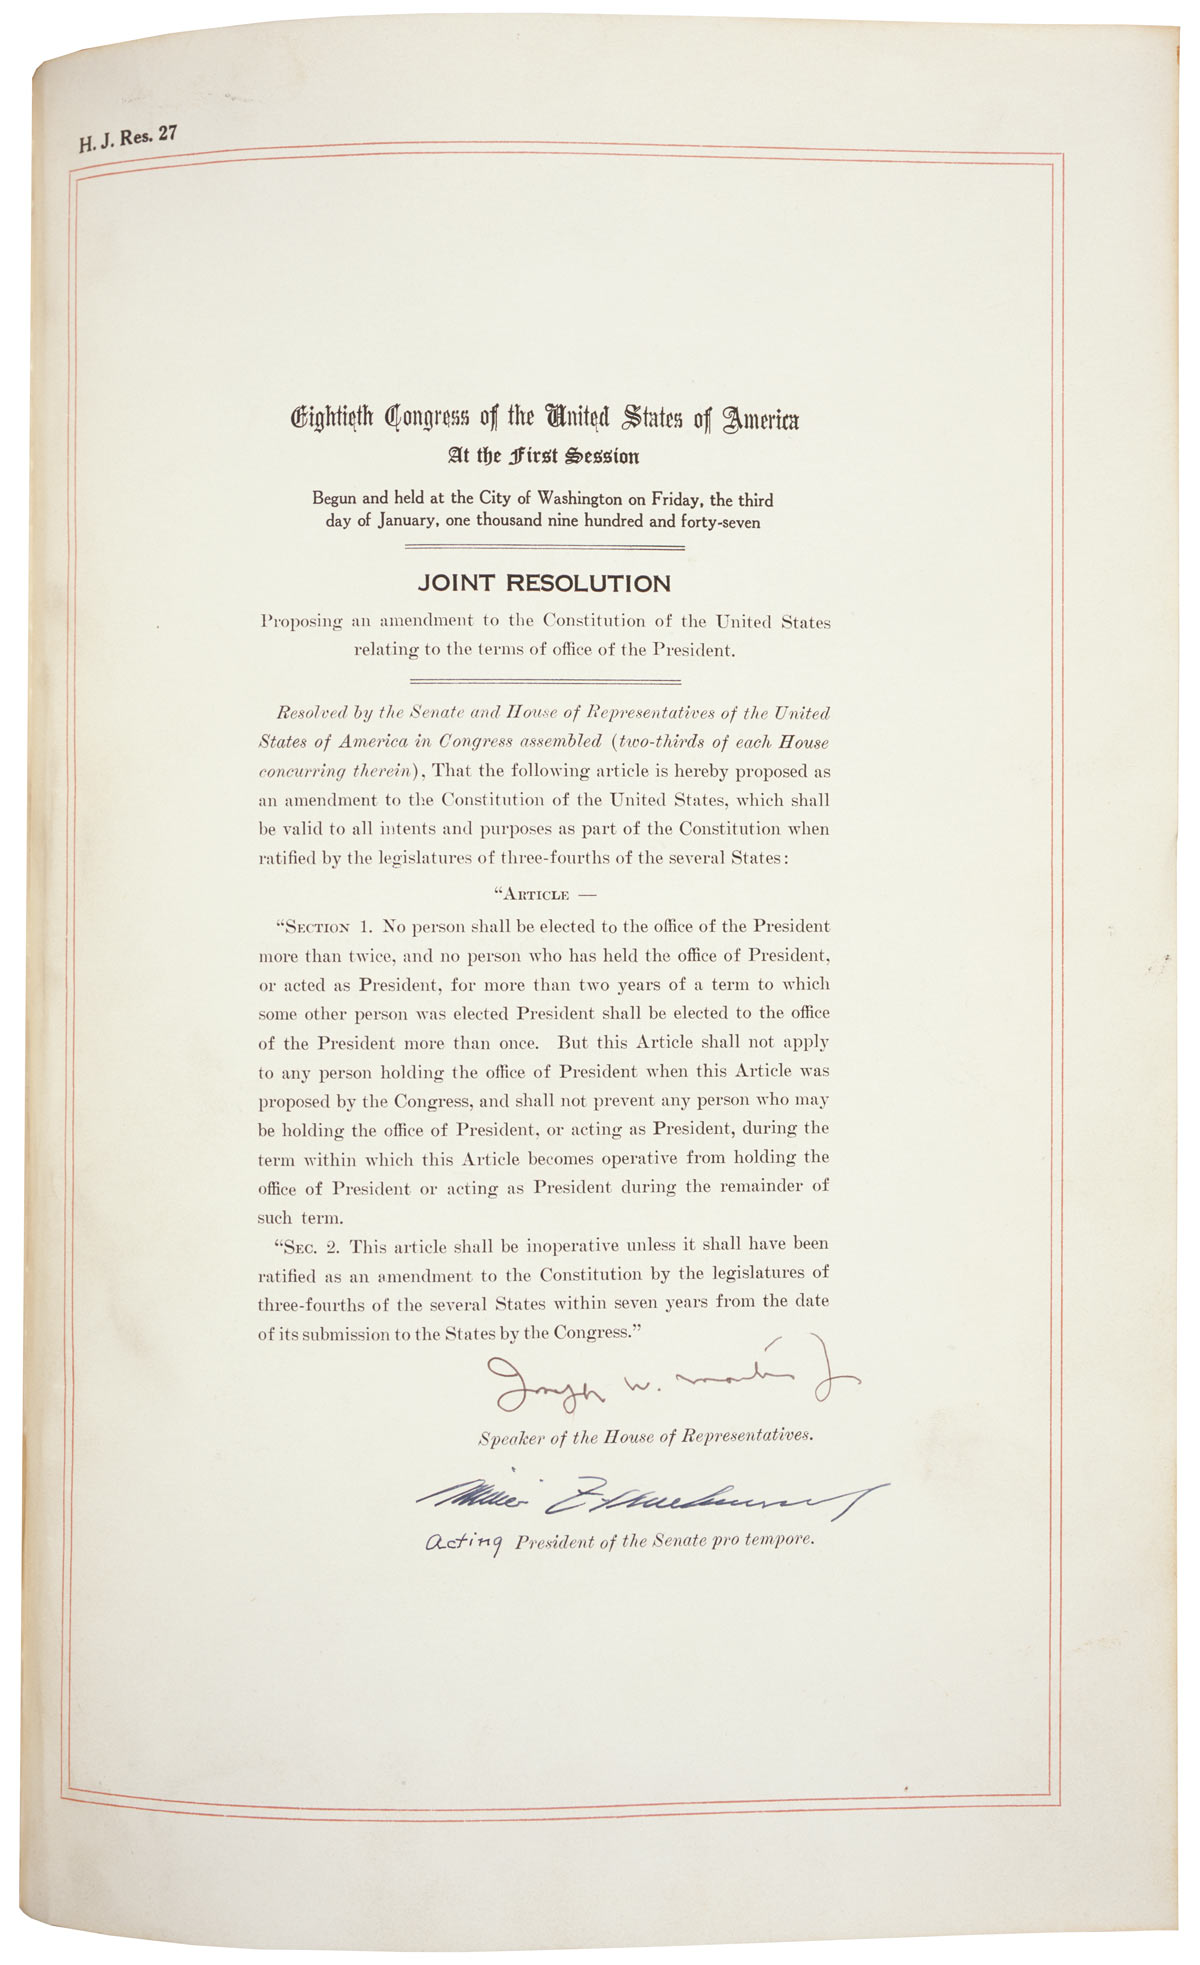 U.S. Congress, “Proposing an amendment to the Constitution of the United States relating to the terms of office of the President,” H.J. Res. 27, 80th Cong., 1st sess., January 3, 1947. National Archives, https://www.archives.gov/exhibits/running-for-office/larger-image.php?image=44.1&TB_iframe=true.  